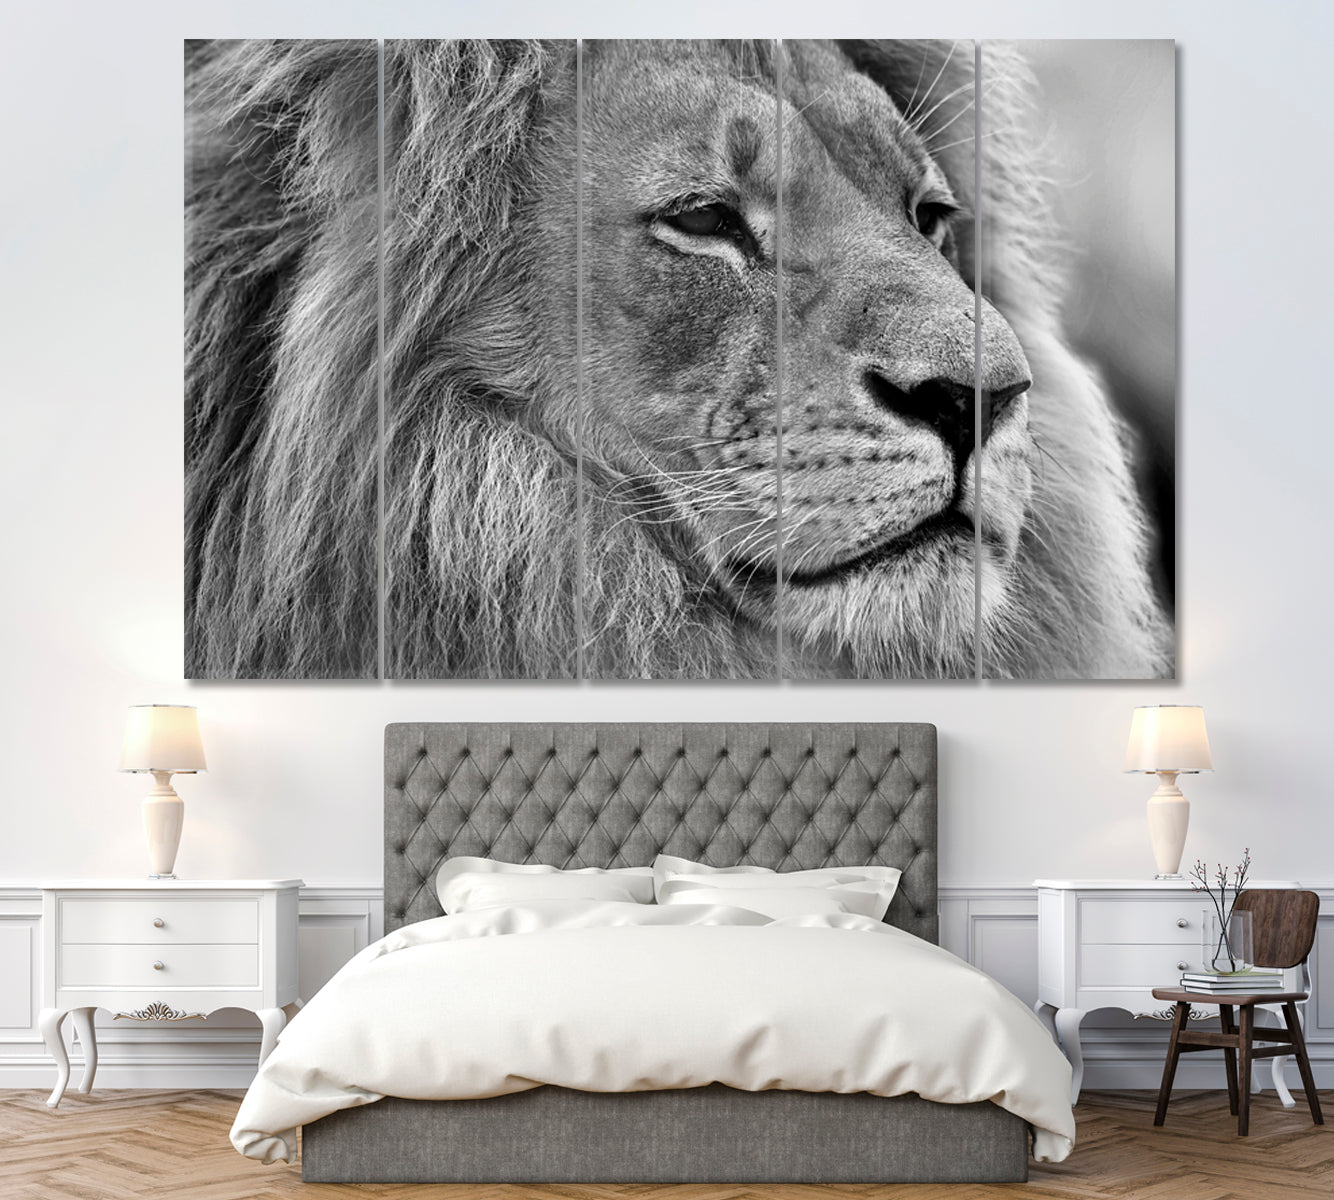 Wild Lion in Black and White Canvas Print ArtLexy 5 Panels 36"x24" inches 